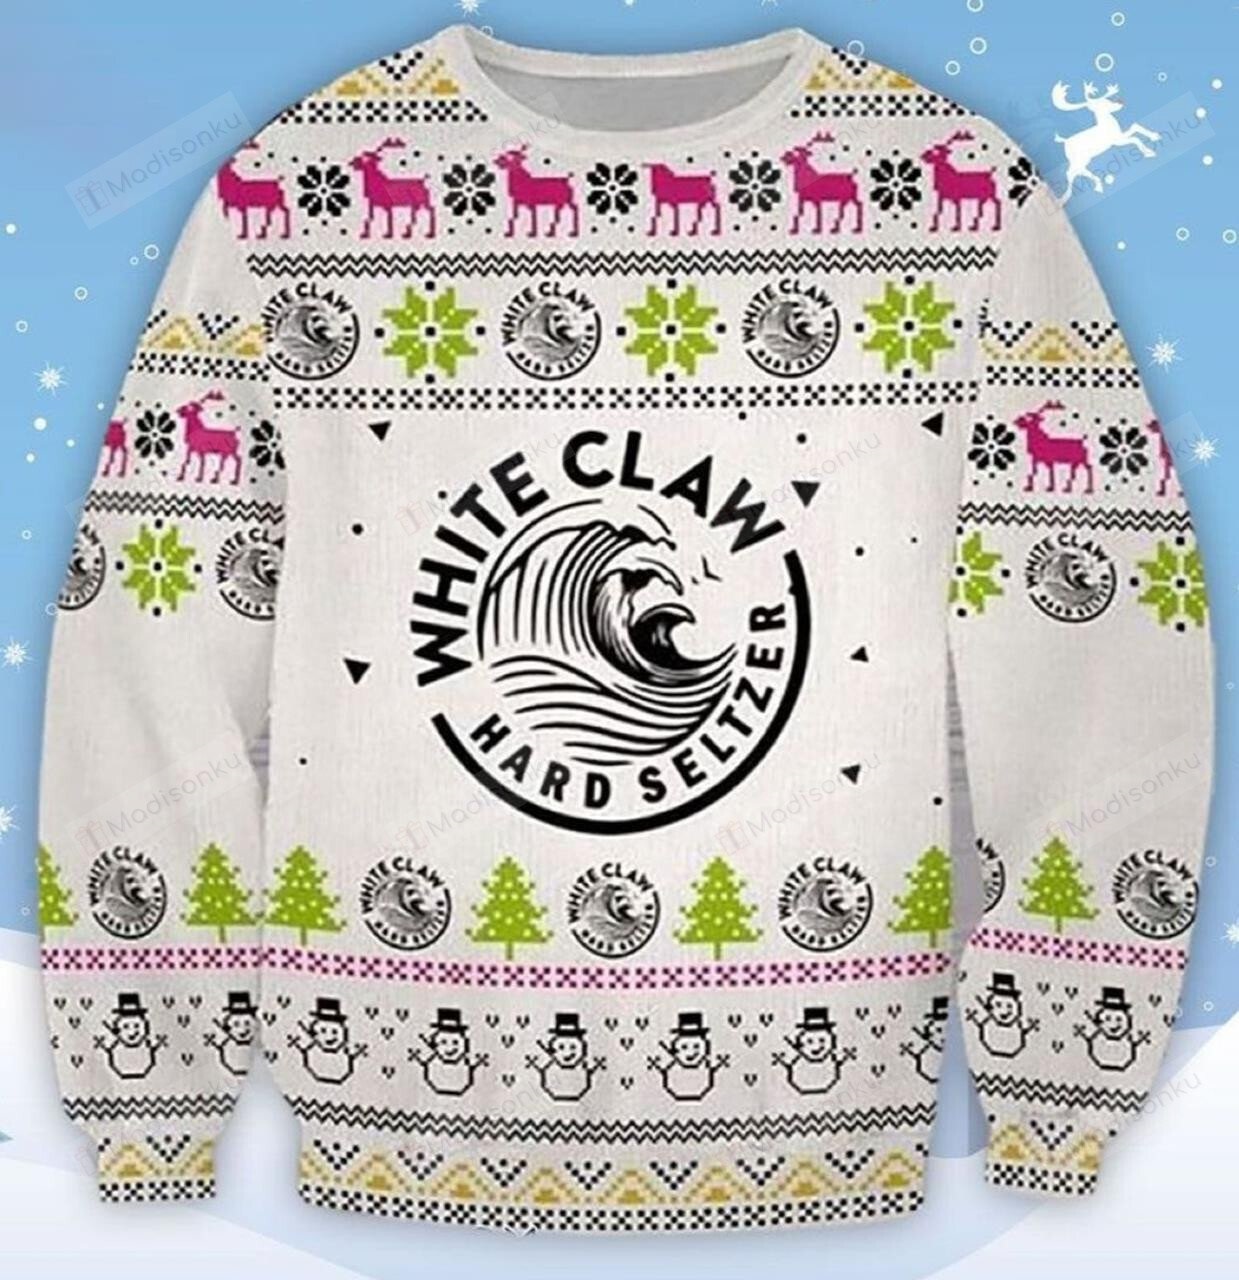 White Claws Hard Seltzer ugly christmas sweater